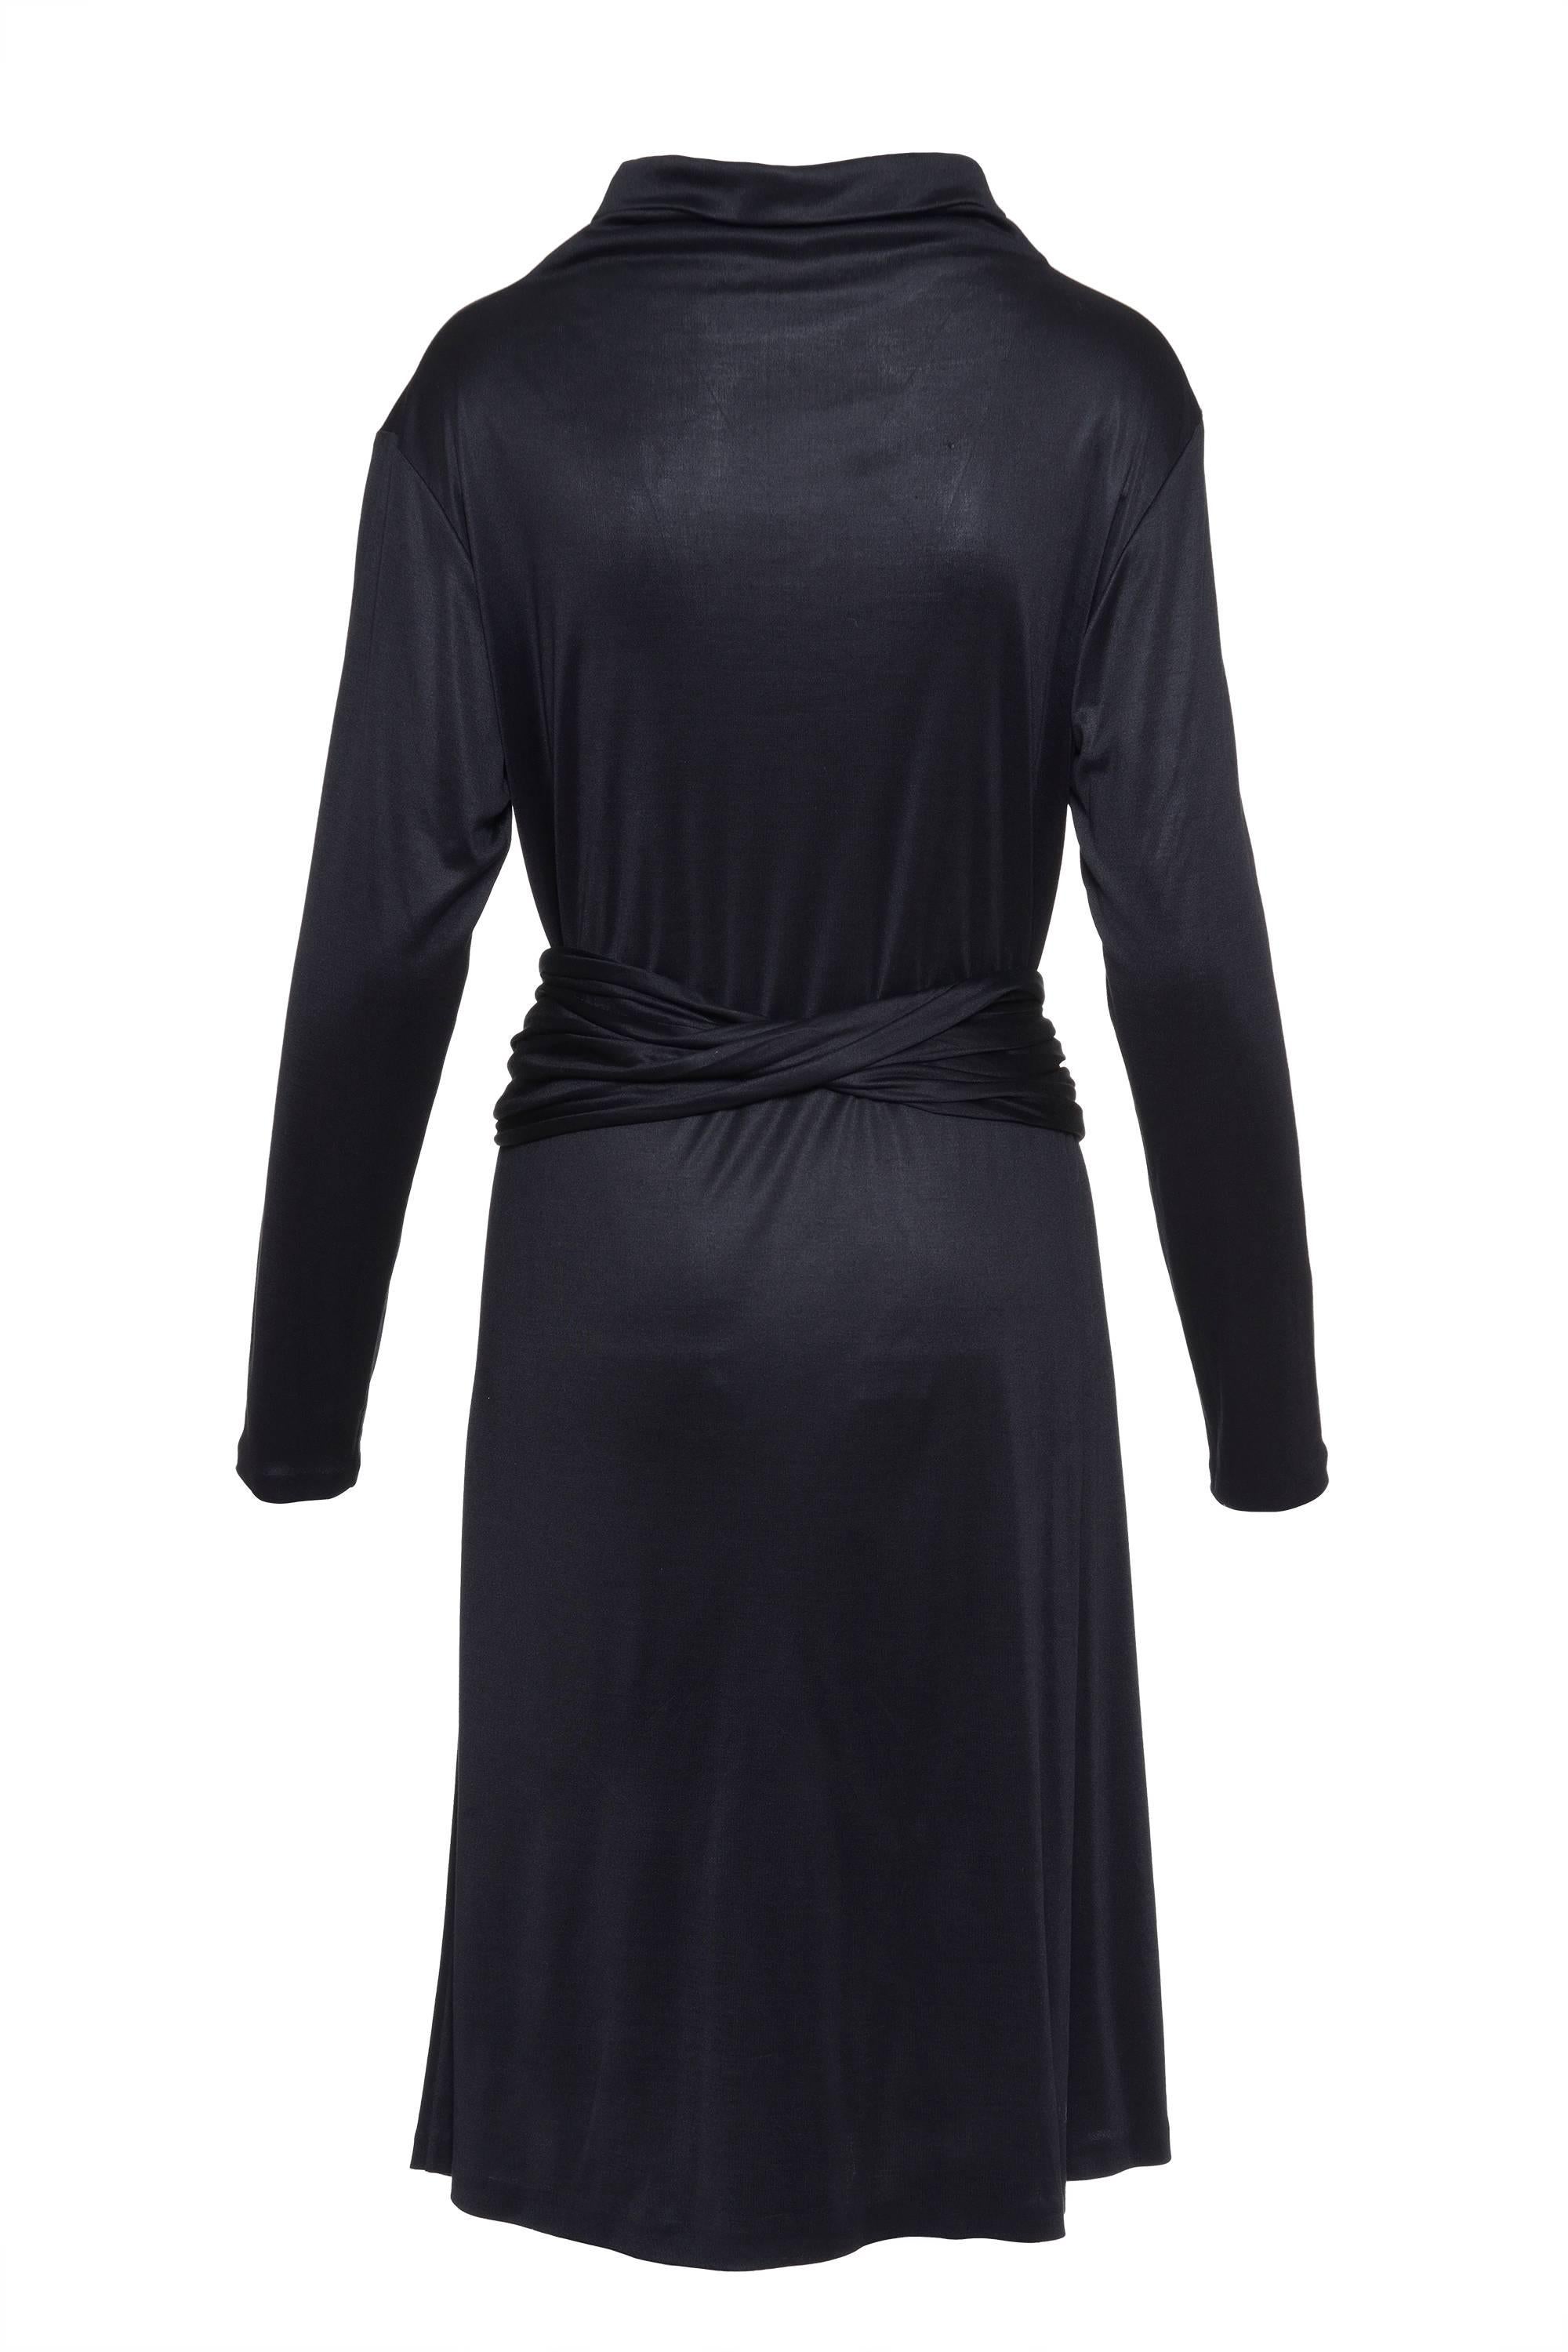 This beautiful black jersey dress by HERMÈS has a cowl collar, long sleeves, and a decorative belt with a metal chain and details. Made in France.

Excellent conditions

Label: HERMÈS Made in France
Color: Black
Material: 100% Silk

Measurements: